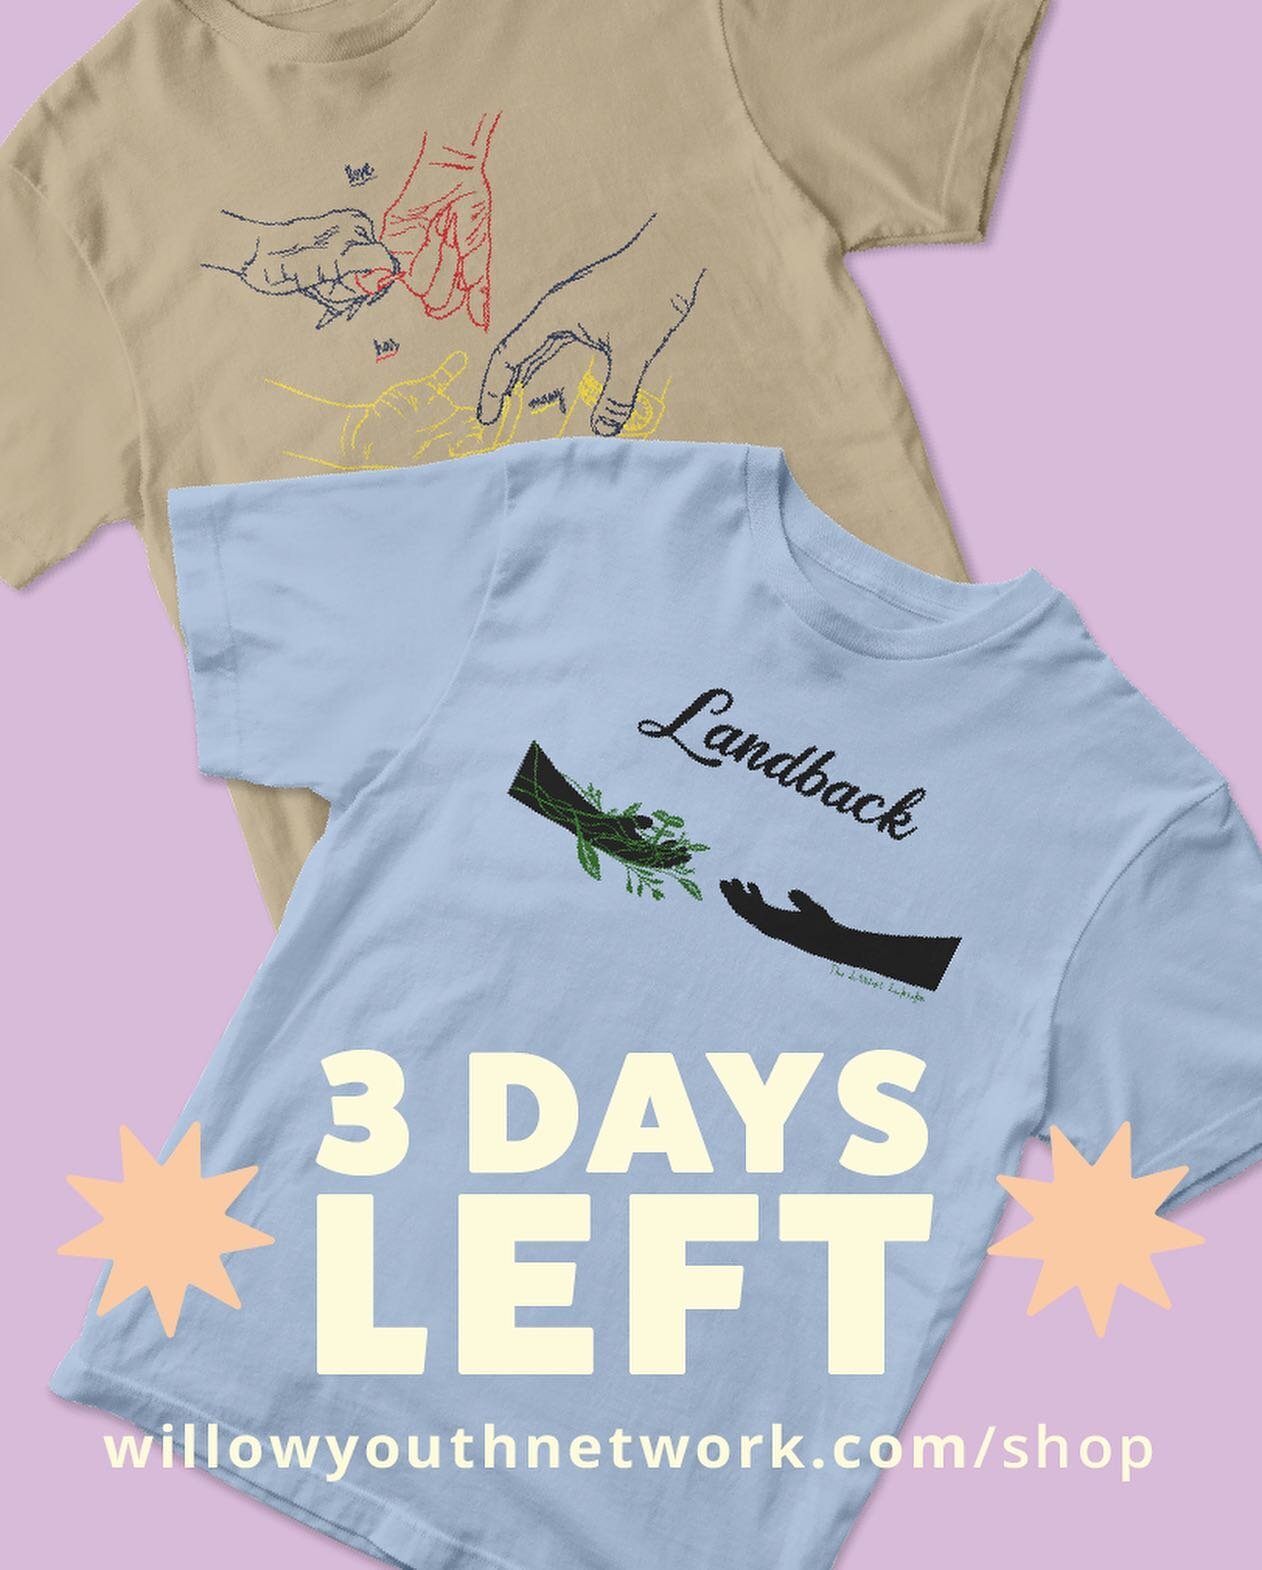 Only 3 days left to order these shirts!! All proceeds go to Indigenous and 2SLGBTQ+ organizations. Get them while you can 😊

Designed by: @thelittlest_inuksuk and @aart_vark_art

.

[Image Description: Two infographic slides with a light purple back